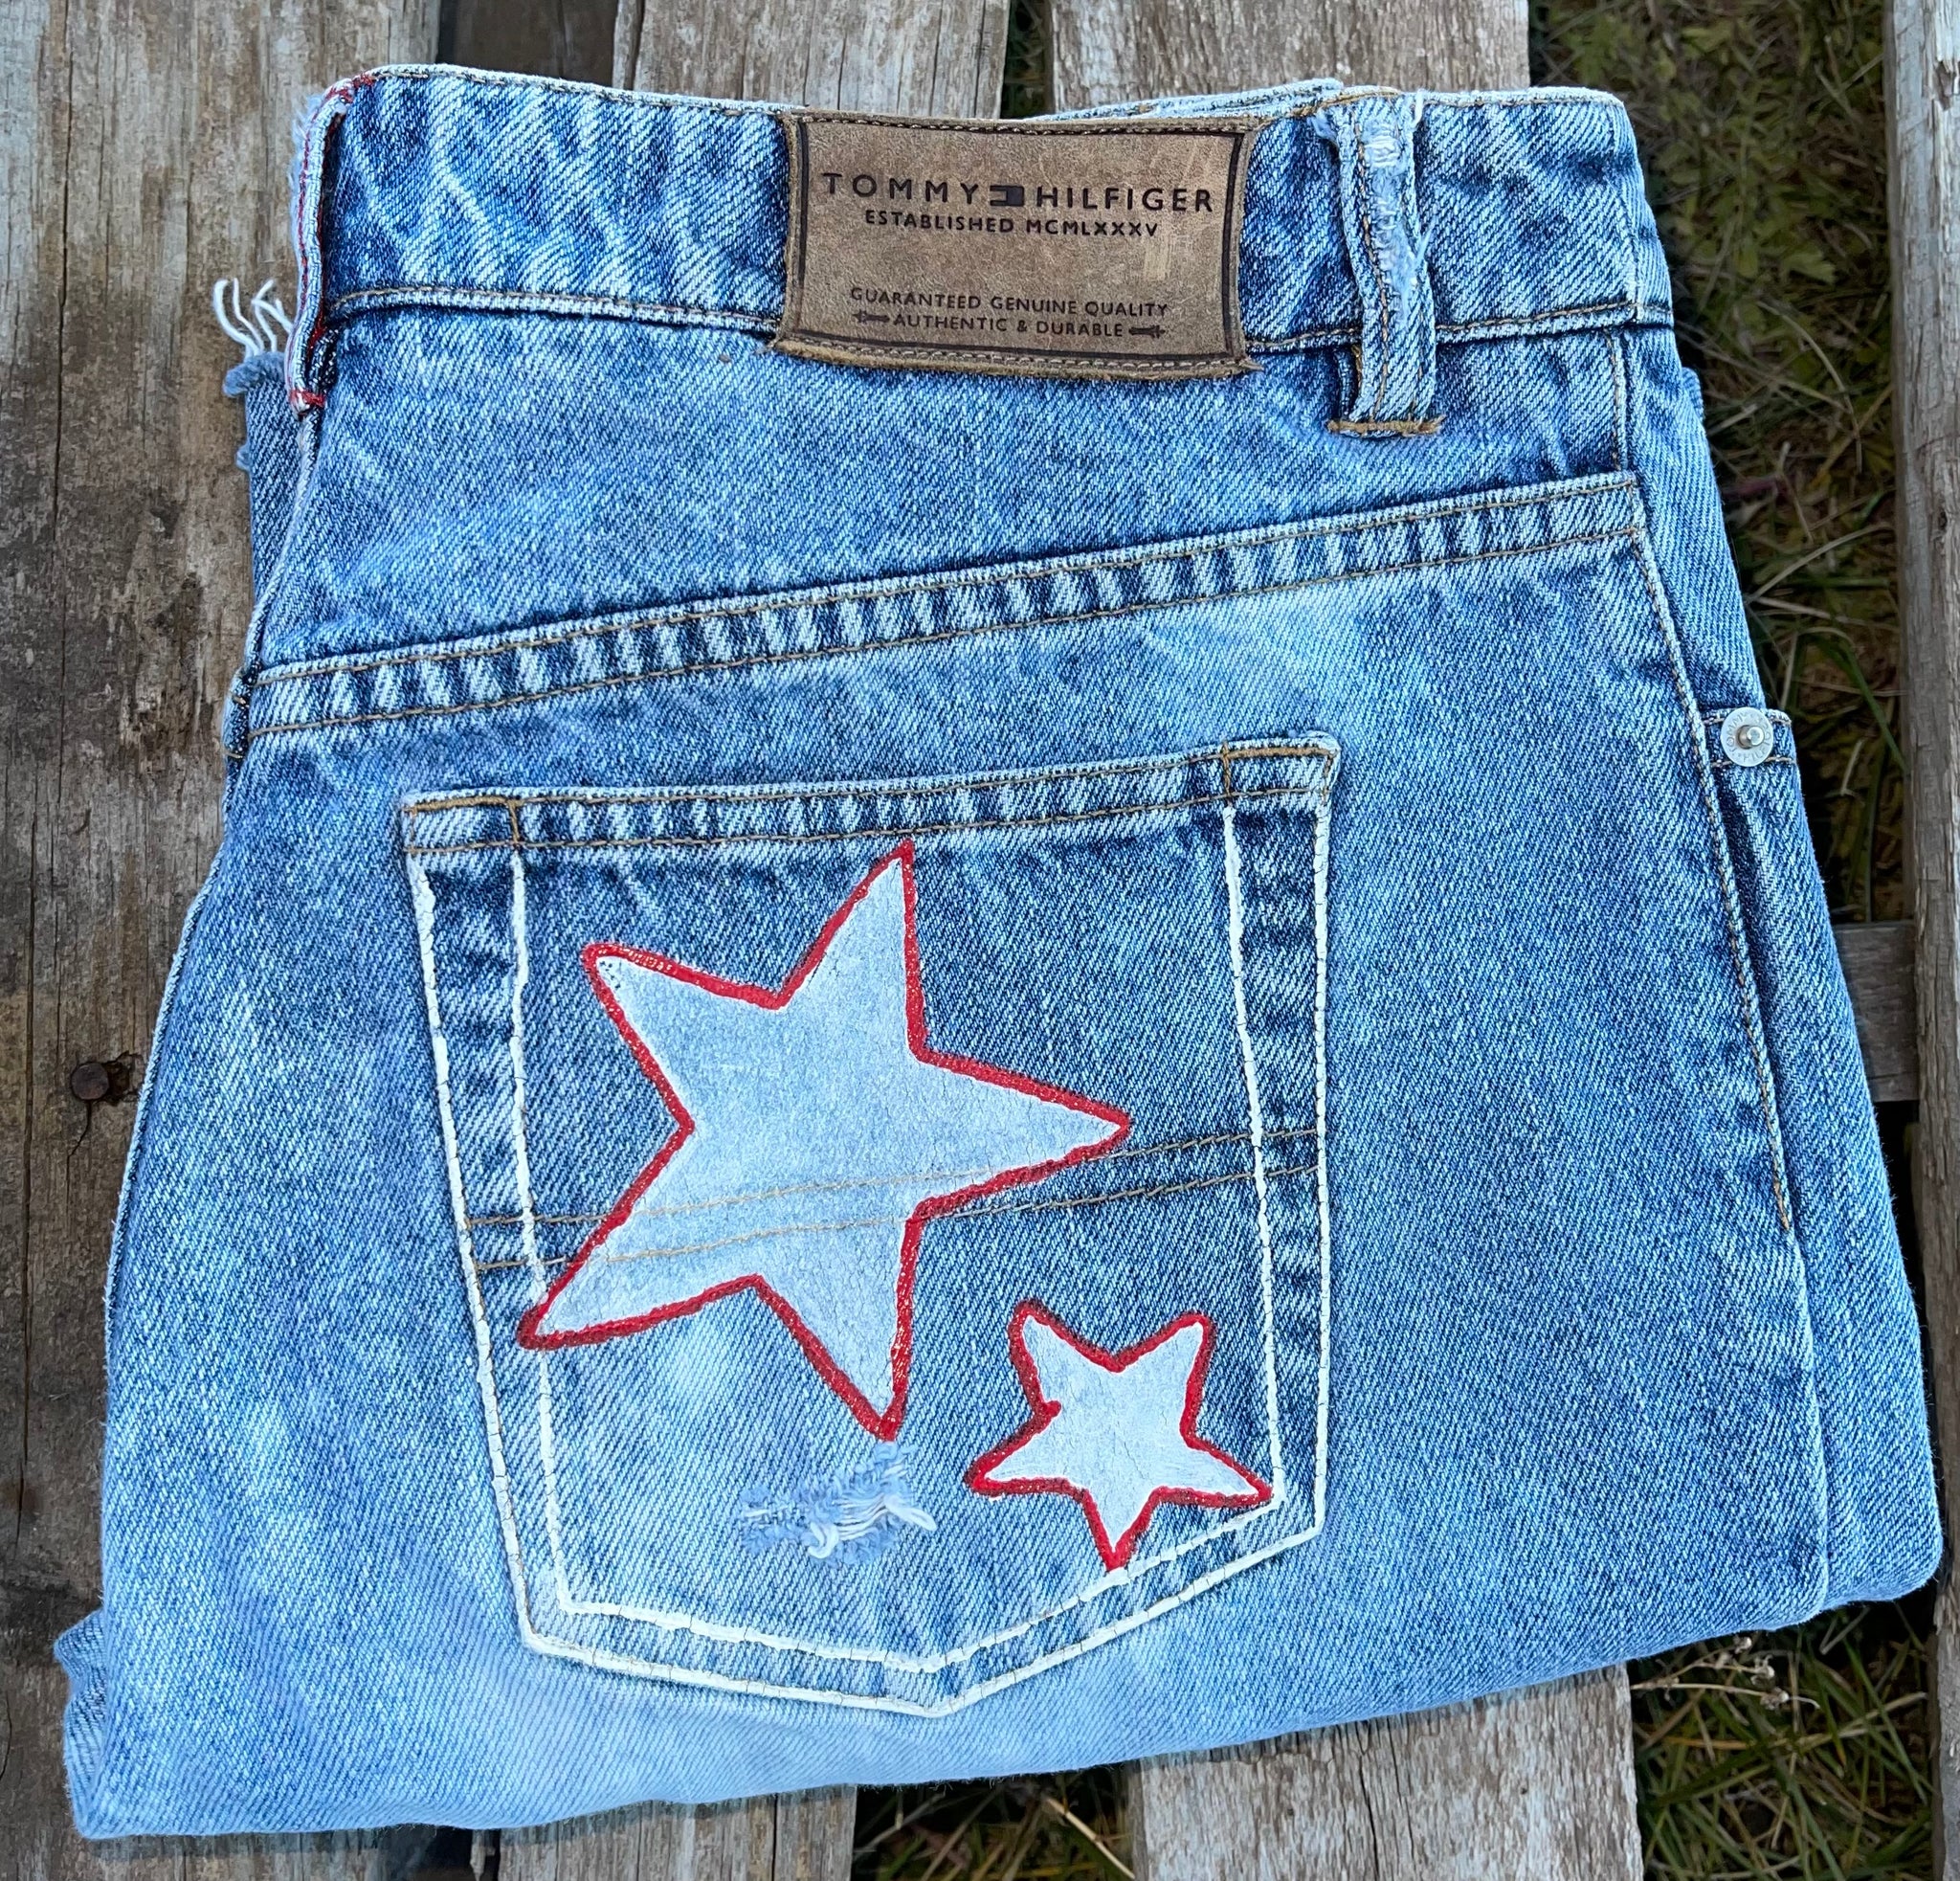 Tommy Hilfiger Hand Painted Star Jeans 31"